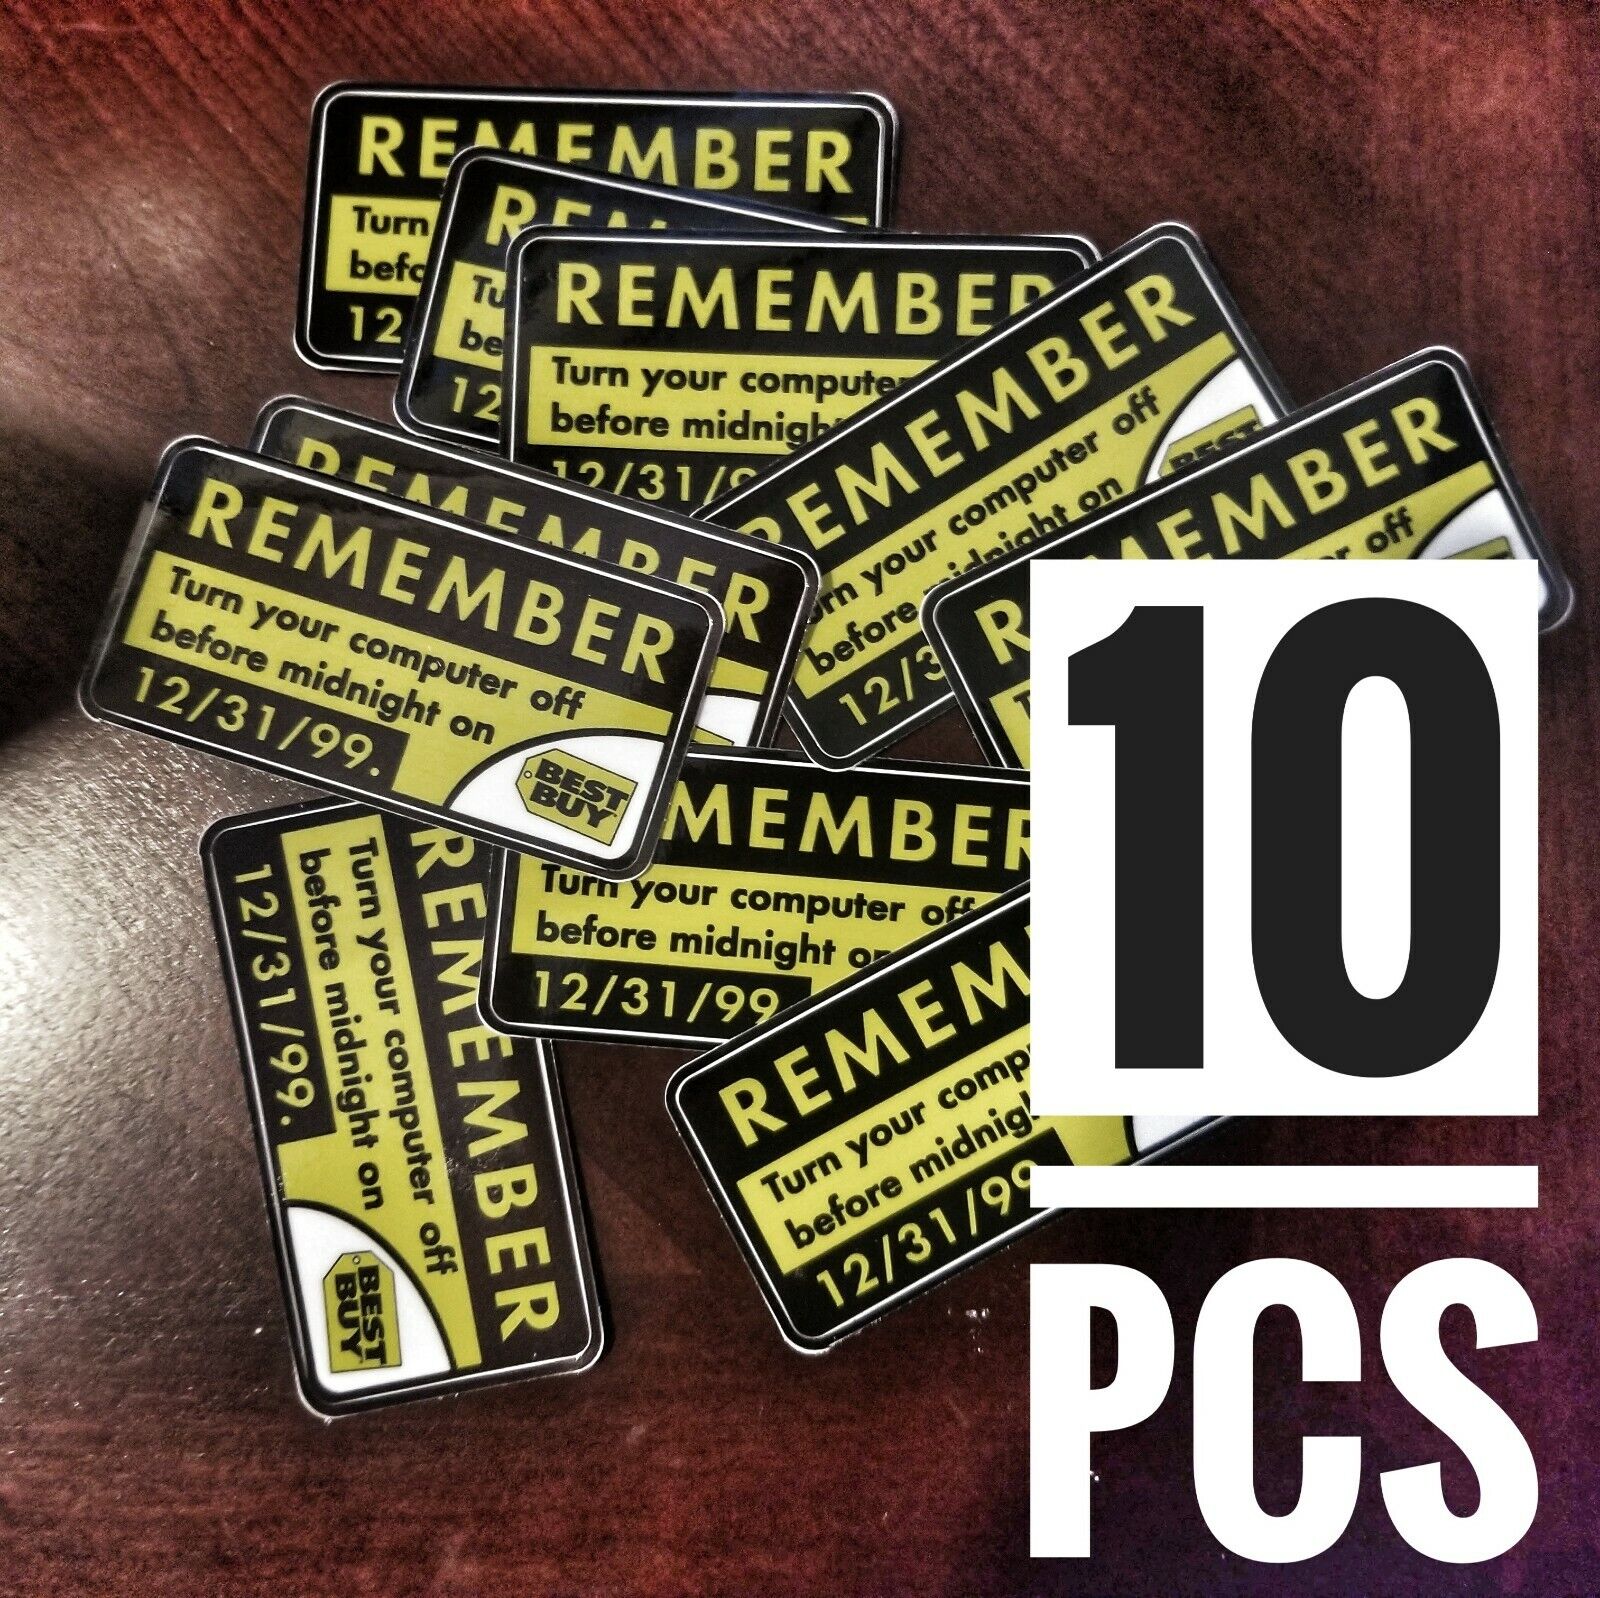 Best Buy Y2K REMEMBER Turn Your Computer Off Retro PC Case Decal Stickers 10 pcs